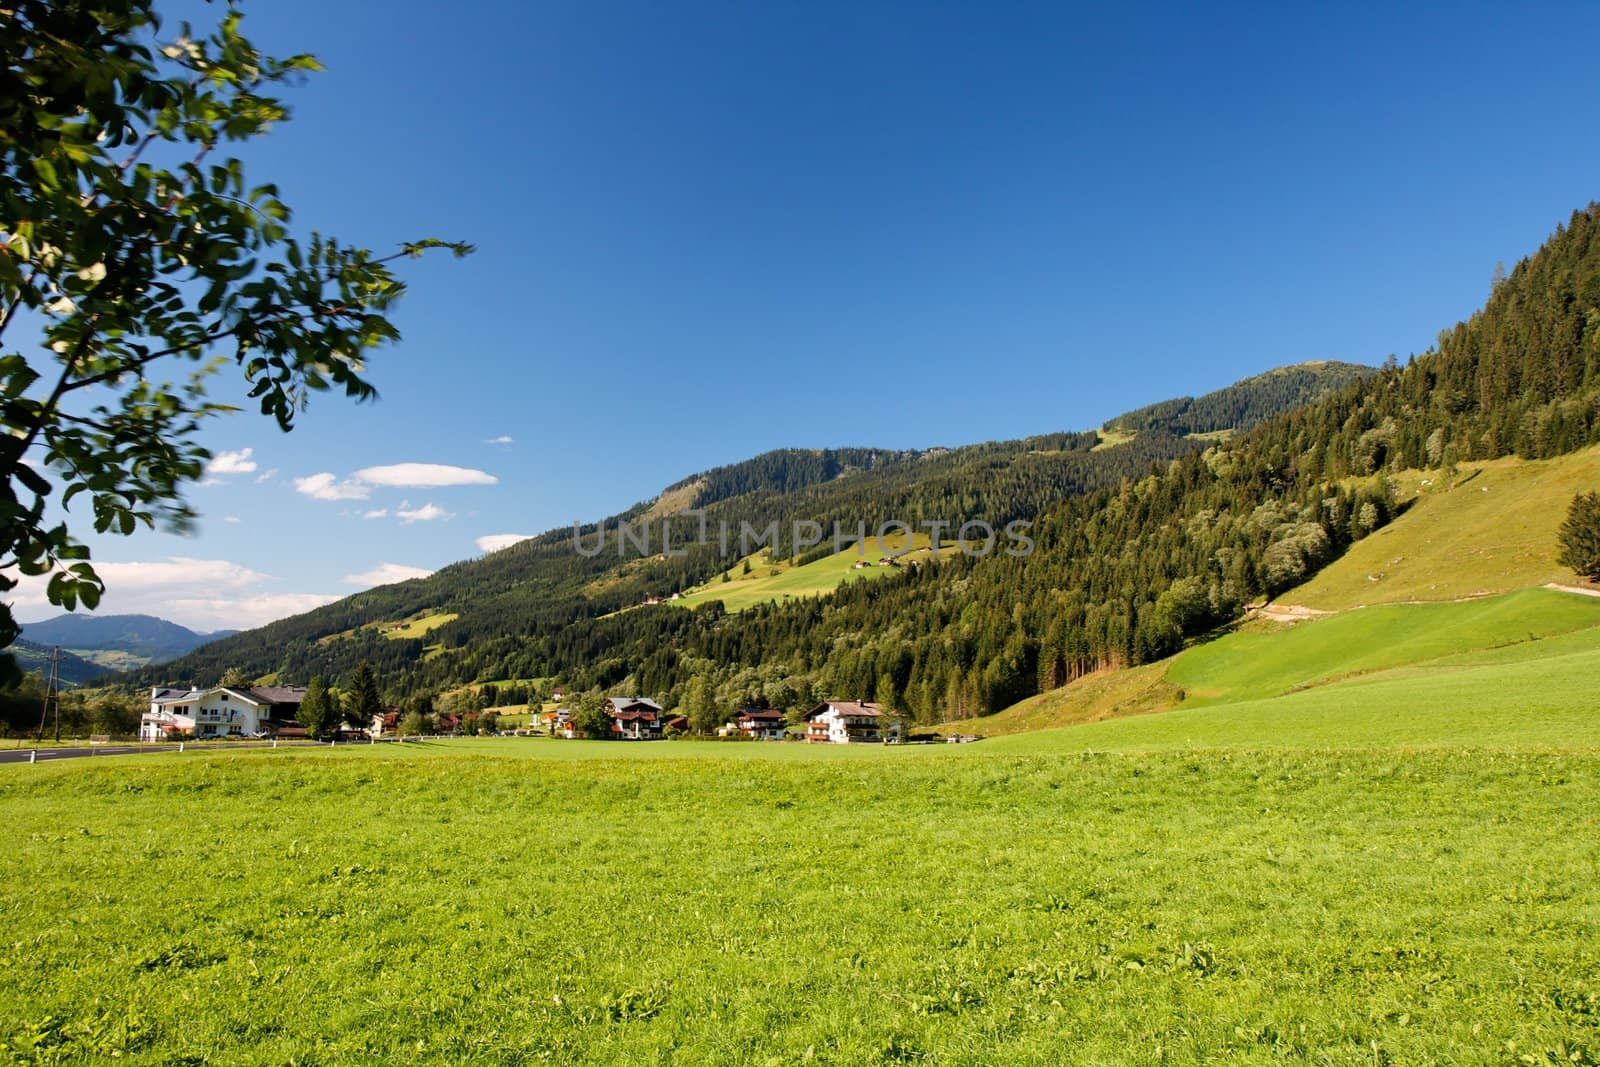 Alpine chalets and meadows under the mountains